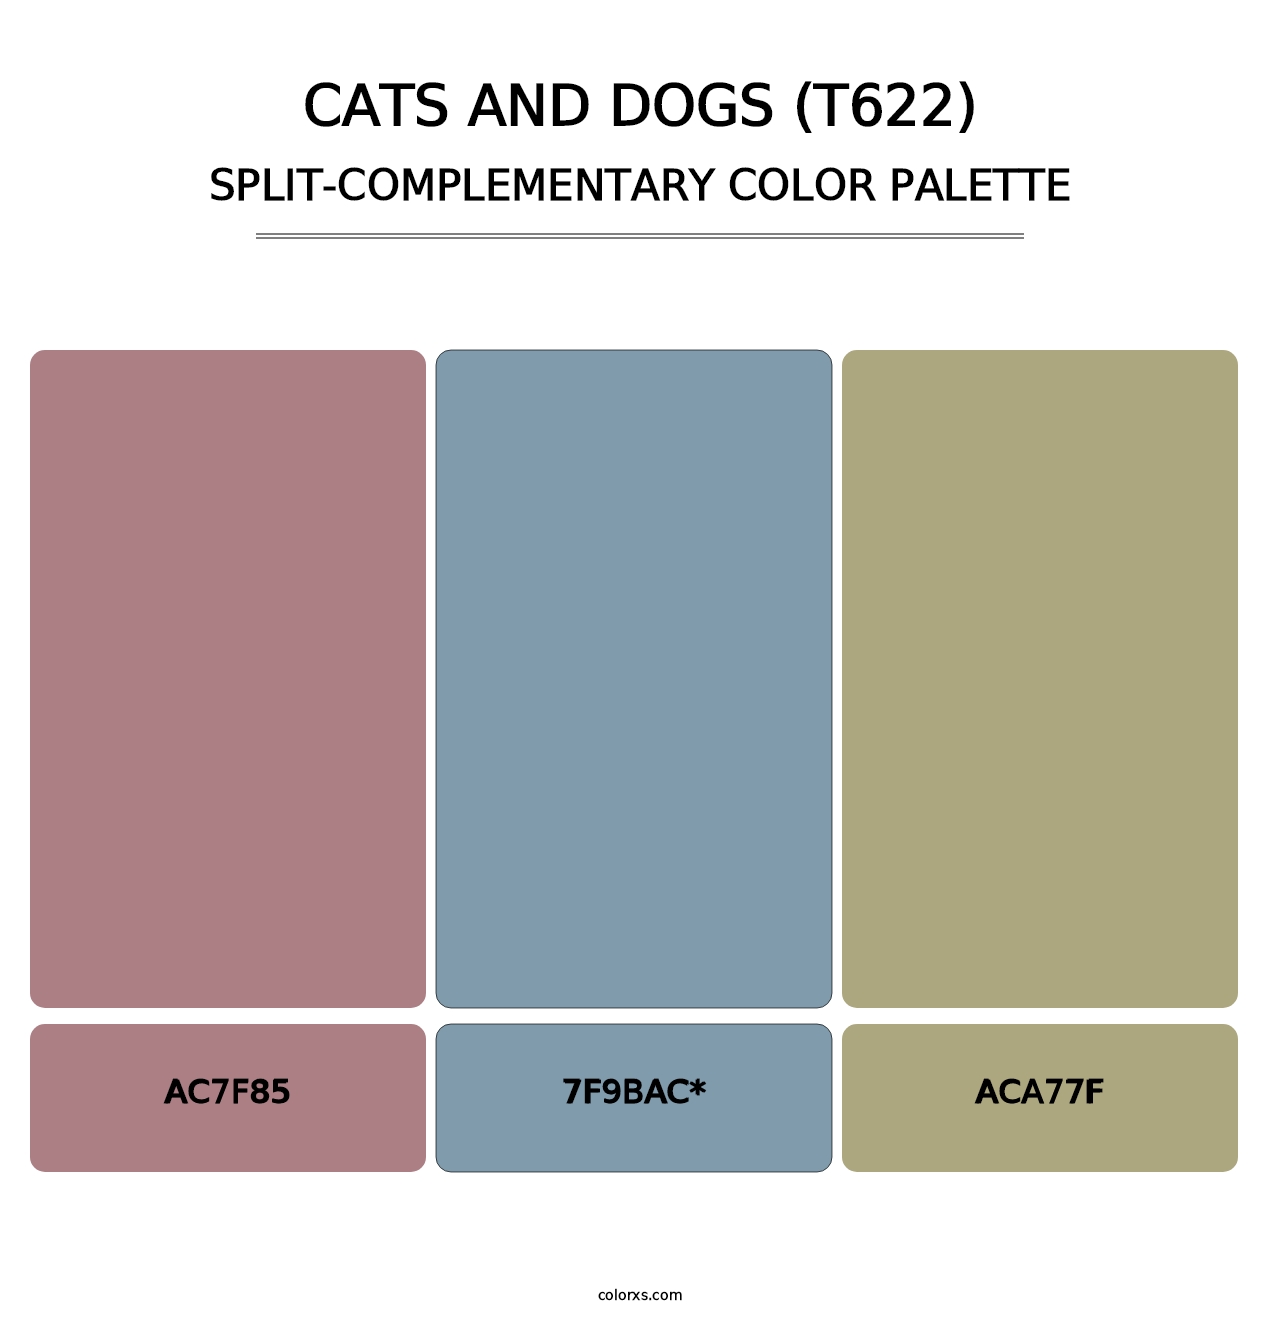 Cats and Dogs (T622) - Split-Complementary Color Palette